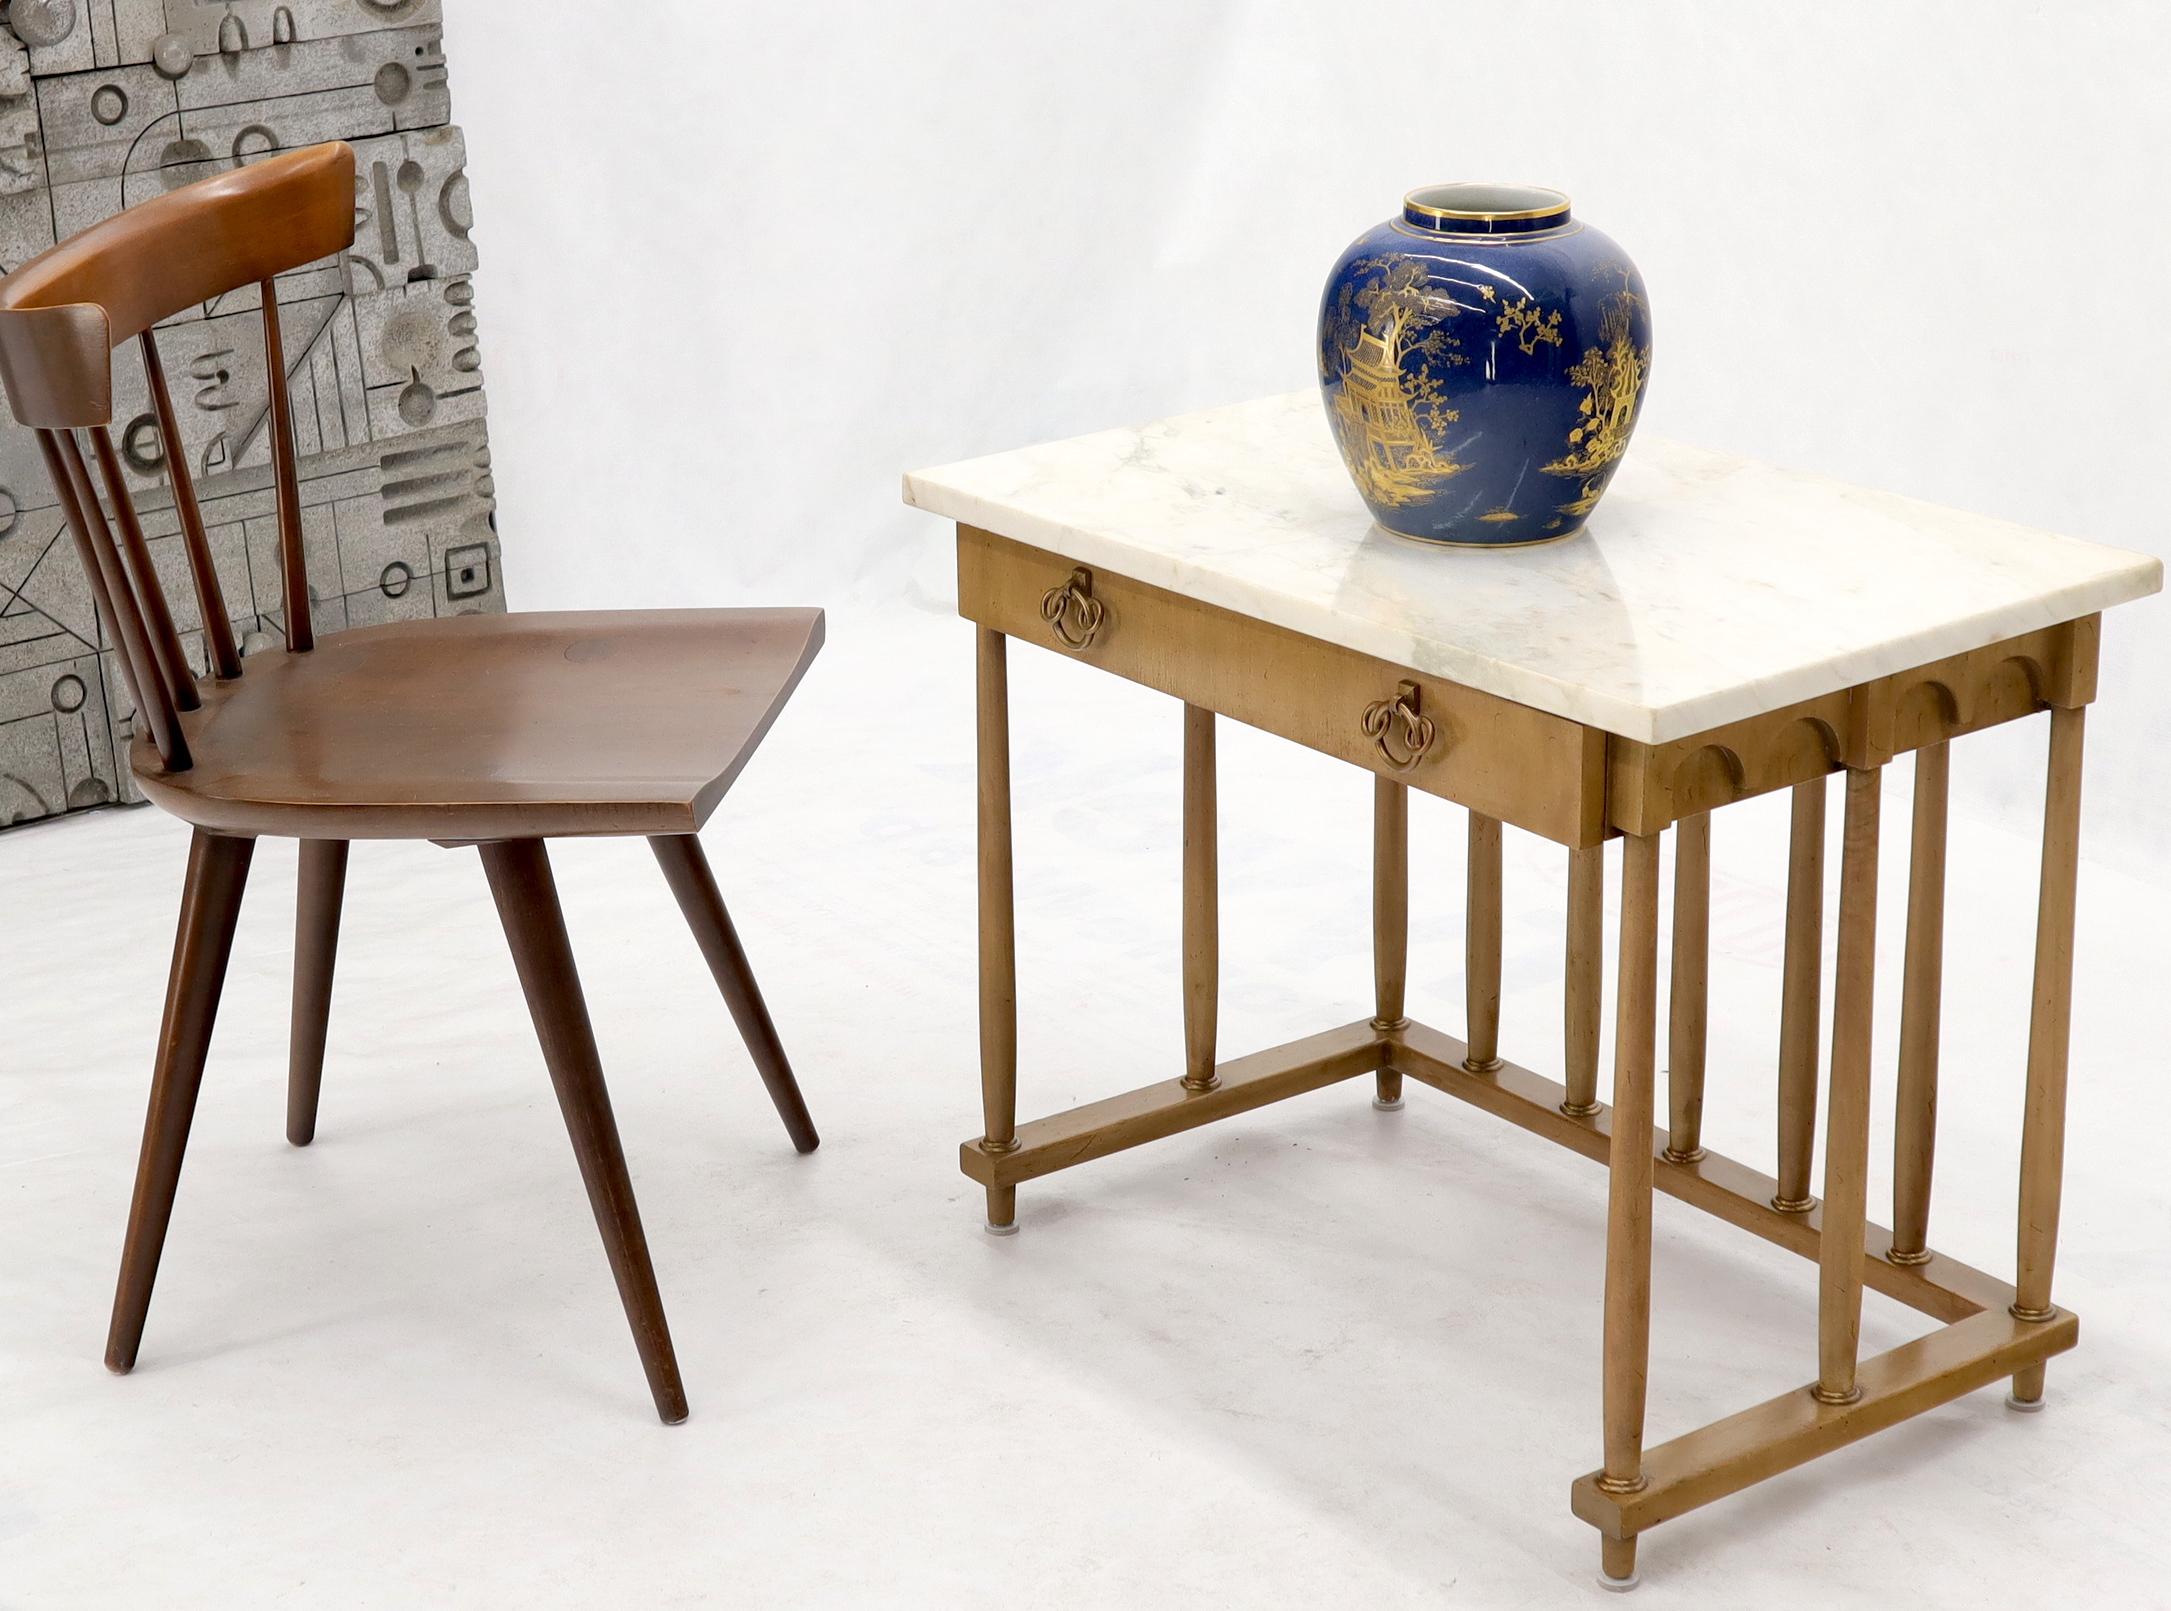 Pair of Mid-Century Modern decorative fruitwood stands end tables or nightstands by John Stuart.